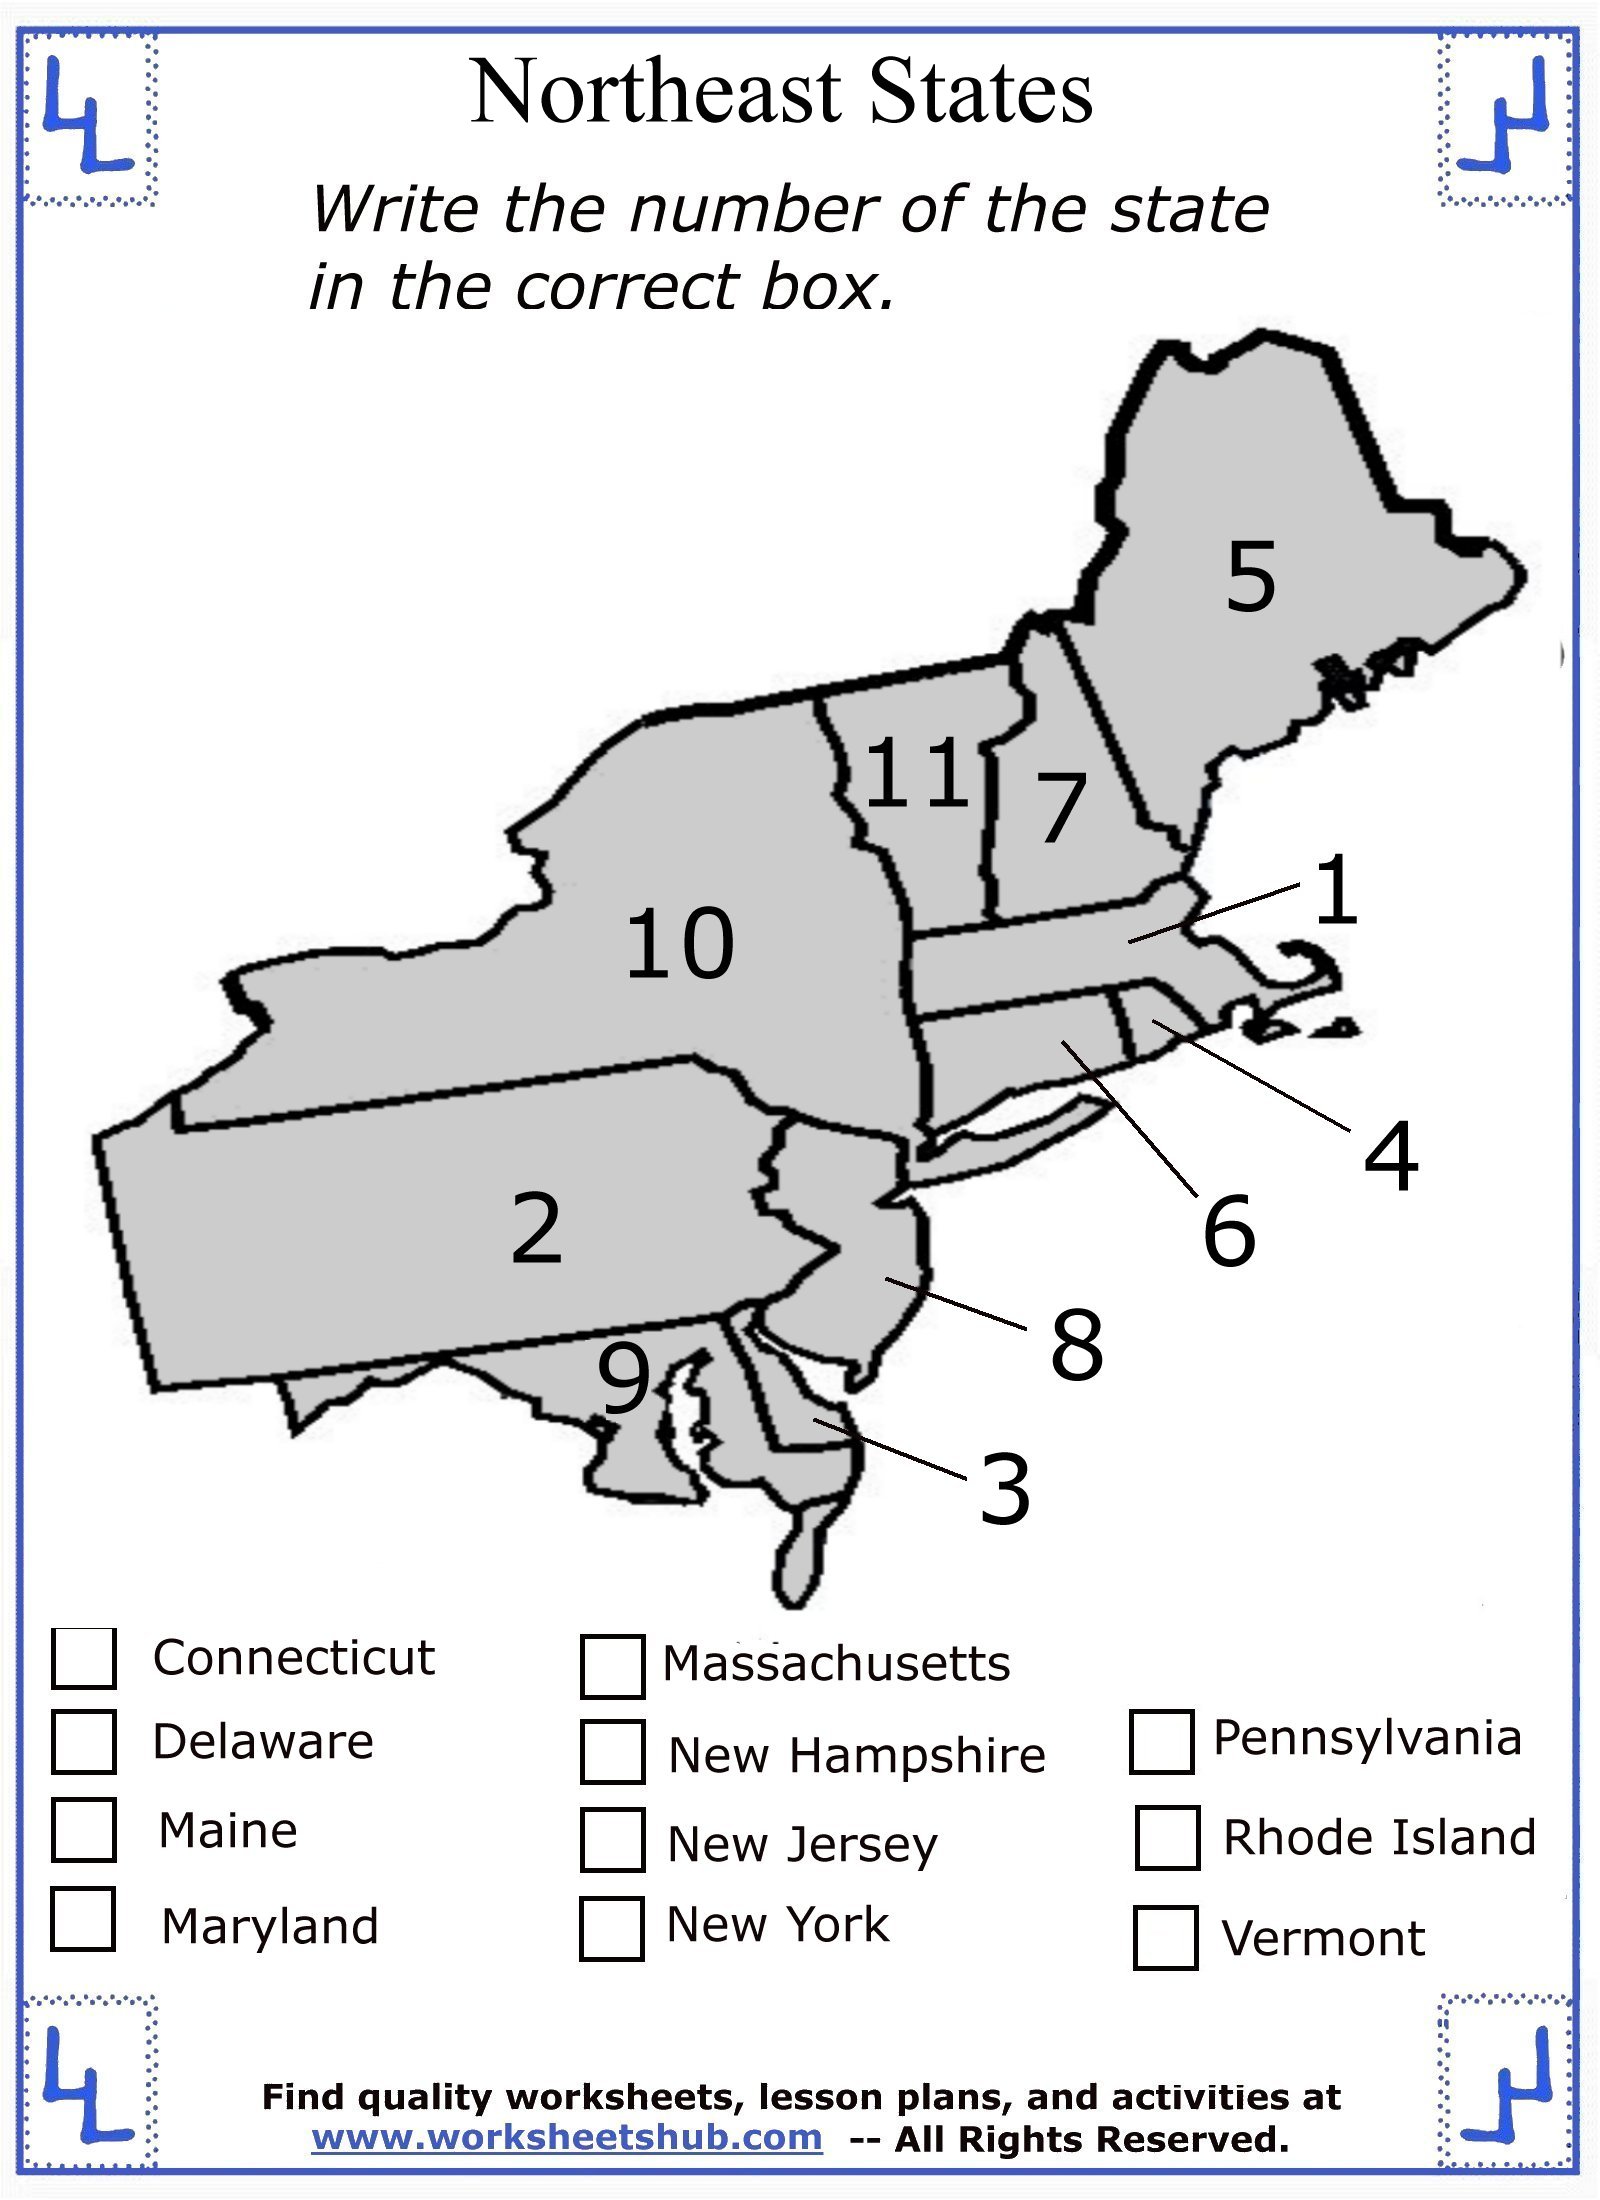 Fourth Grade Social Studies - Northeast Region States and Capitals With Second Grade Social Studies Worksheet